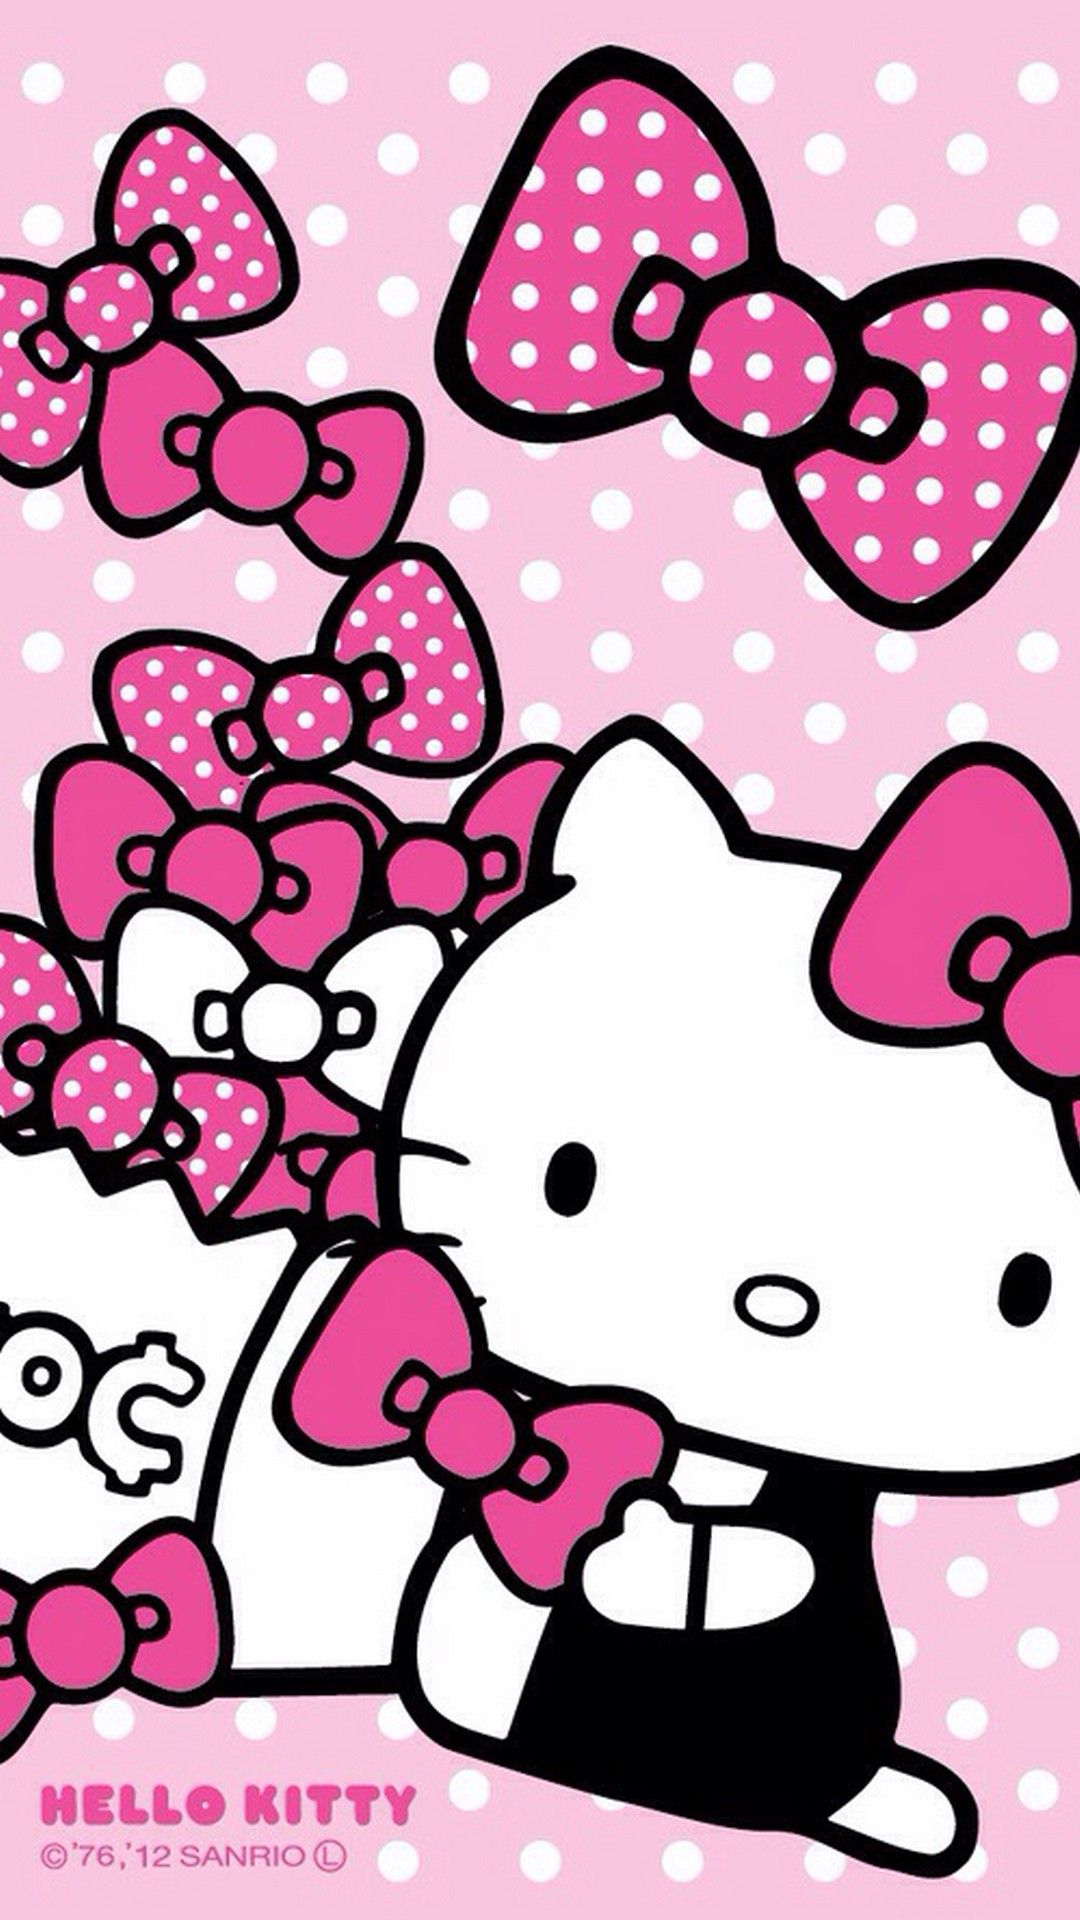 Cute Luis Vuitton and hello Kitty cute wallpapers for iPhone pink